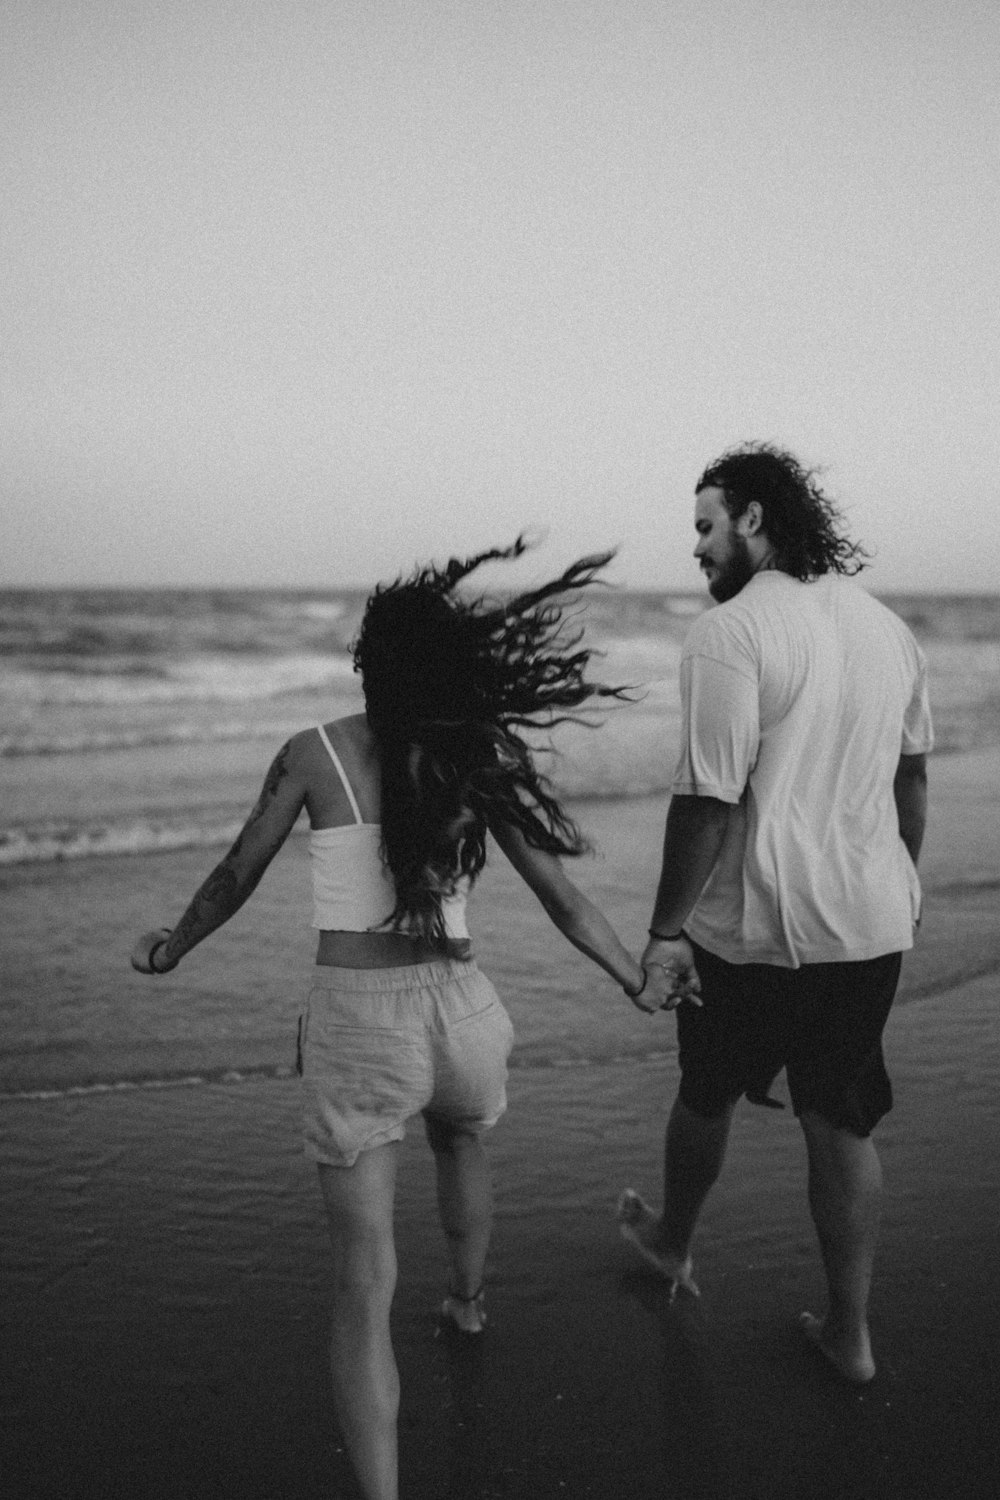 a man and woman walking on a beach